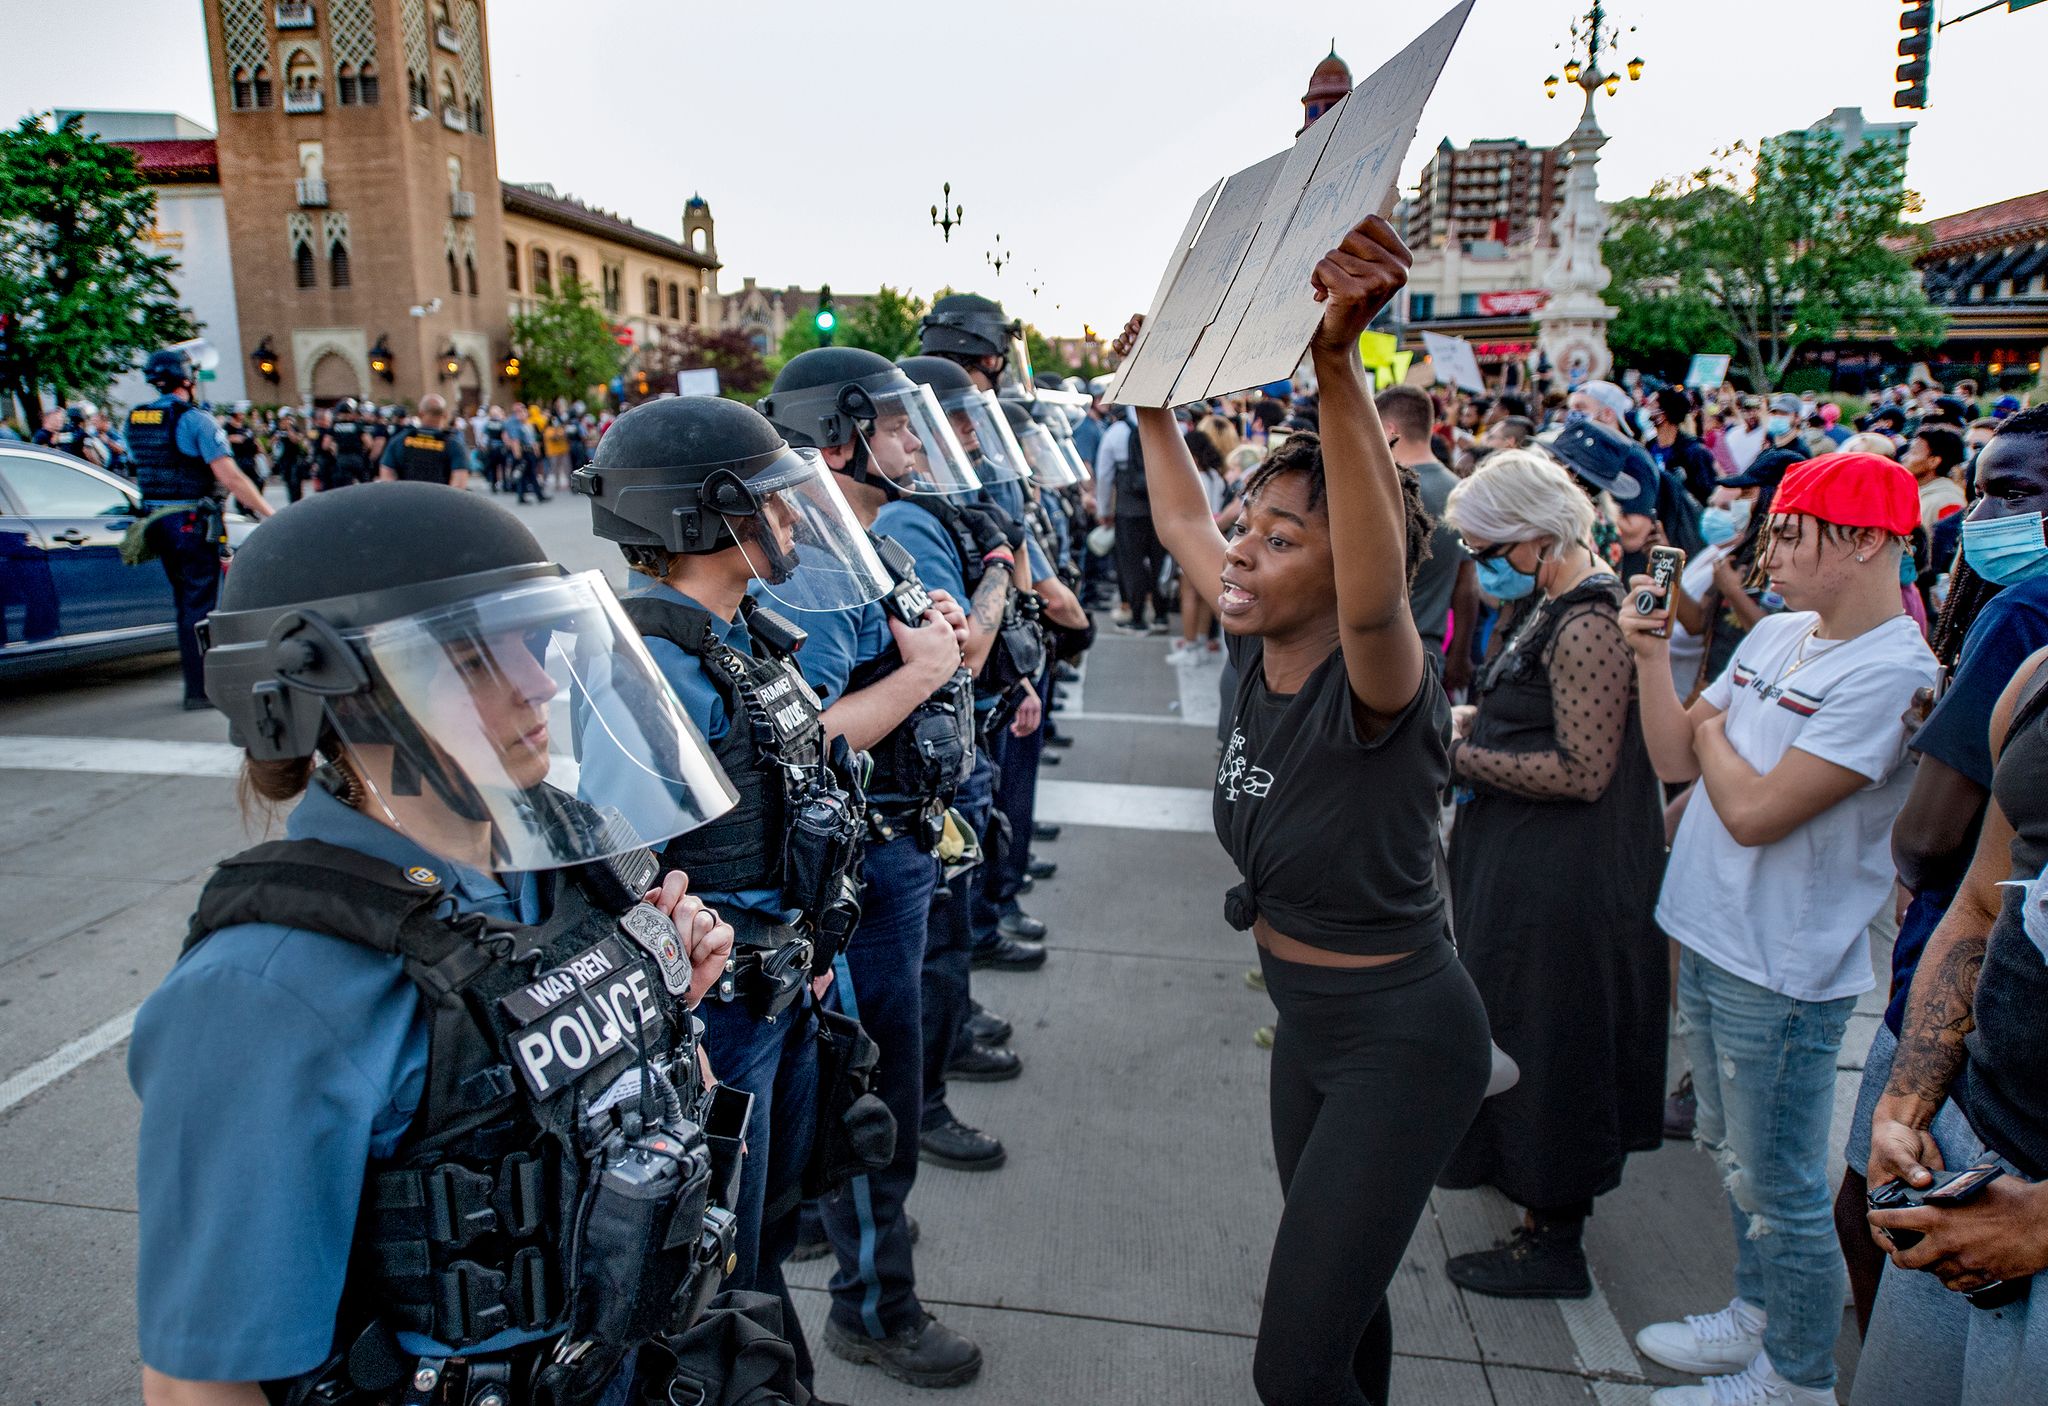 people protesting police brutality and the death of george floyd  standoff with police as they gathered friday, may 29, 2020, at the country club plaza in kansas city  protests have been erupting all over the country after george floyd died earlier this week in police custody in minneapolis